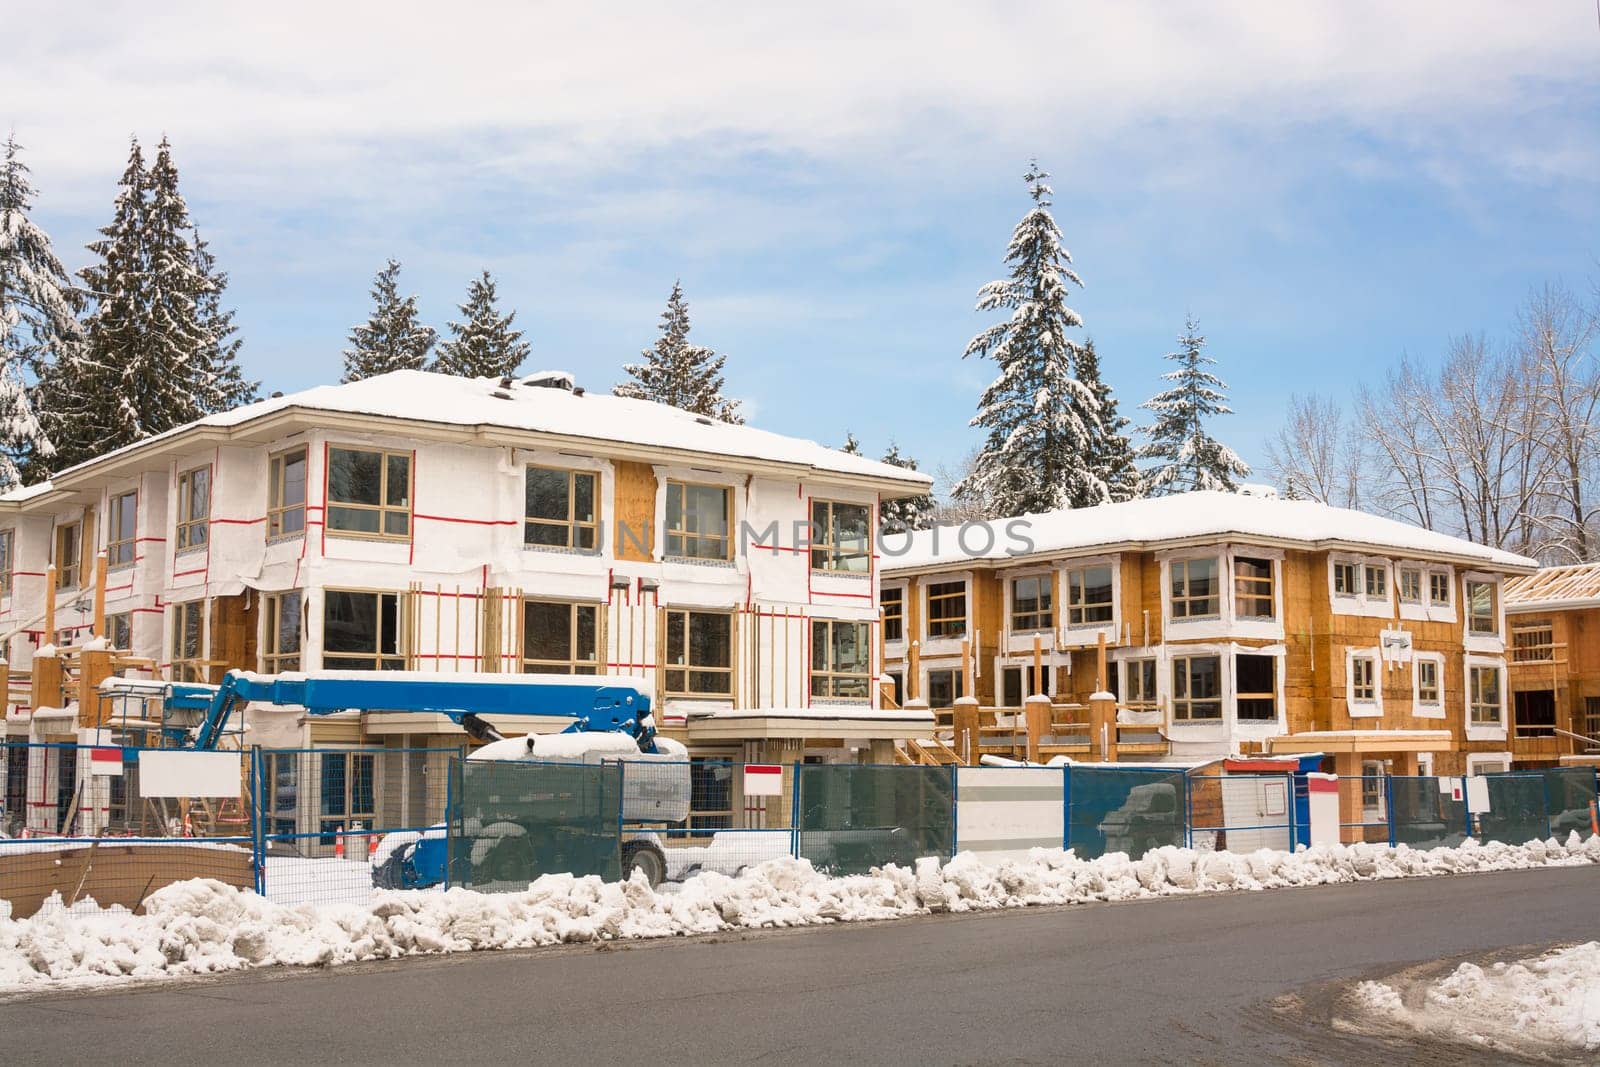 Townhome complex under construction in snow by Imagenet